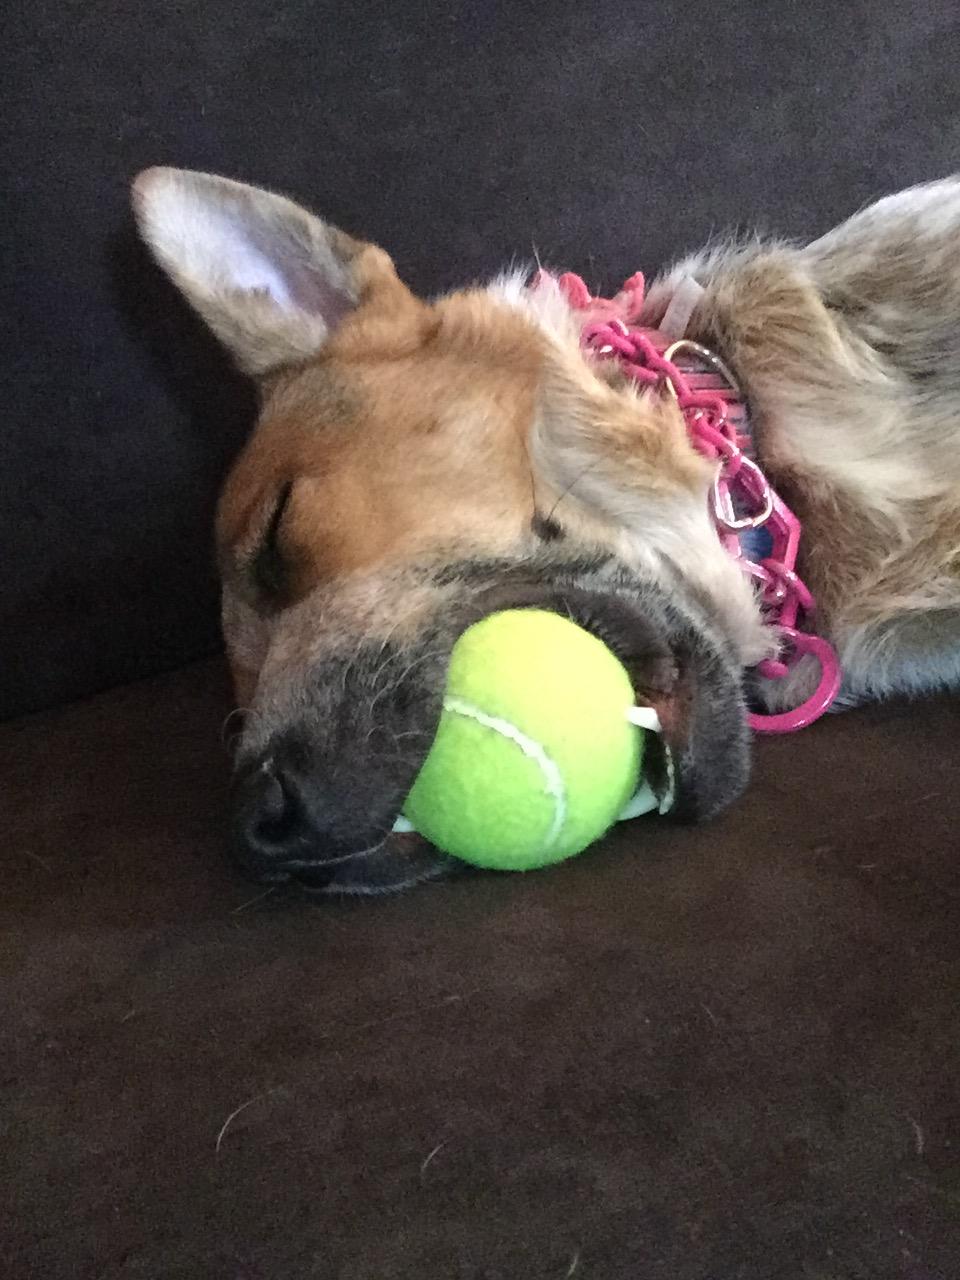 She’s a tennis champion… in her dreams! 